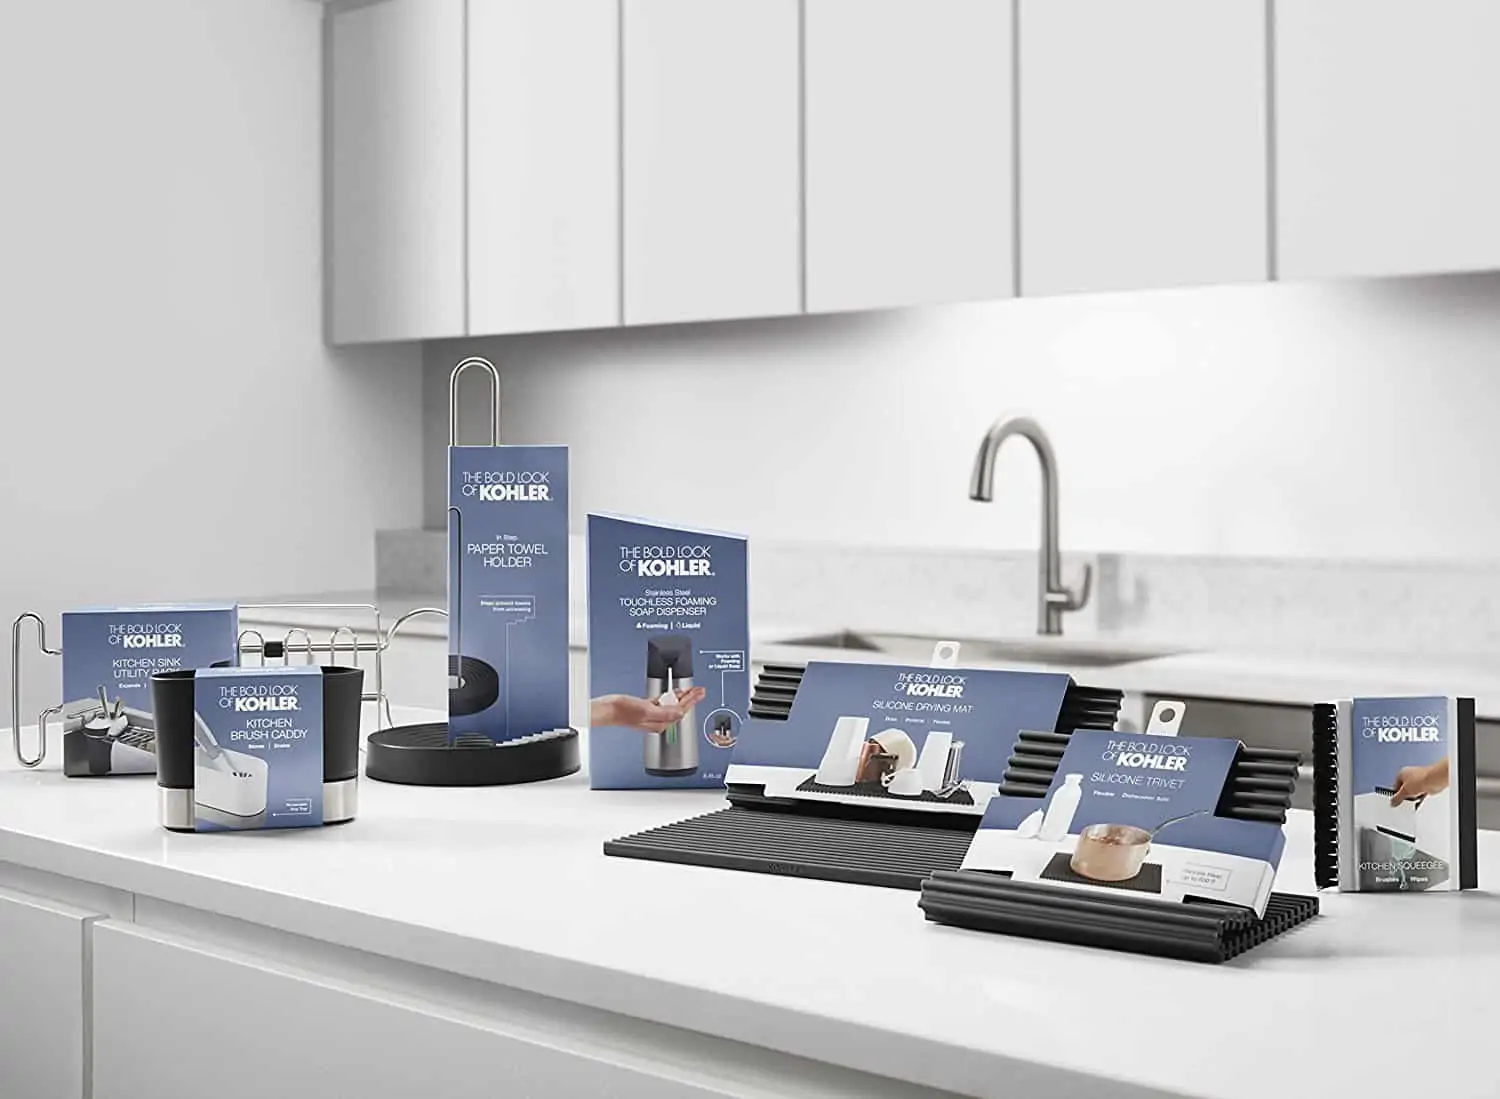 products from kohler kitchen cleaning 